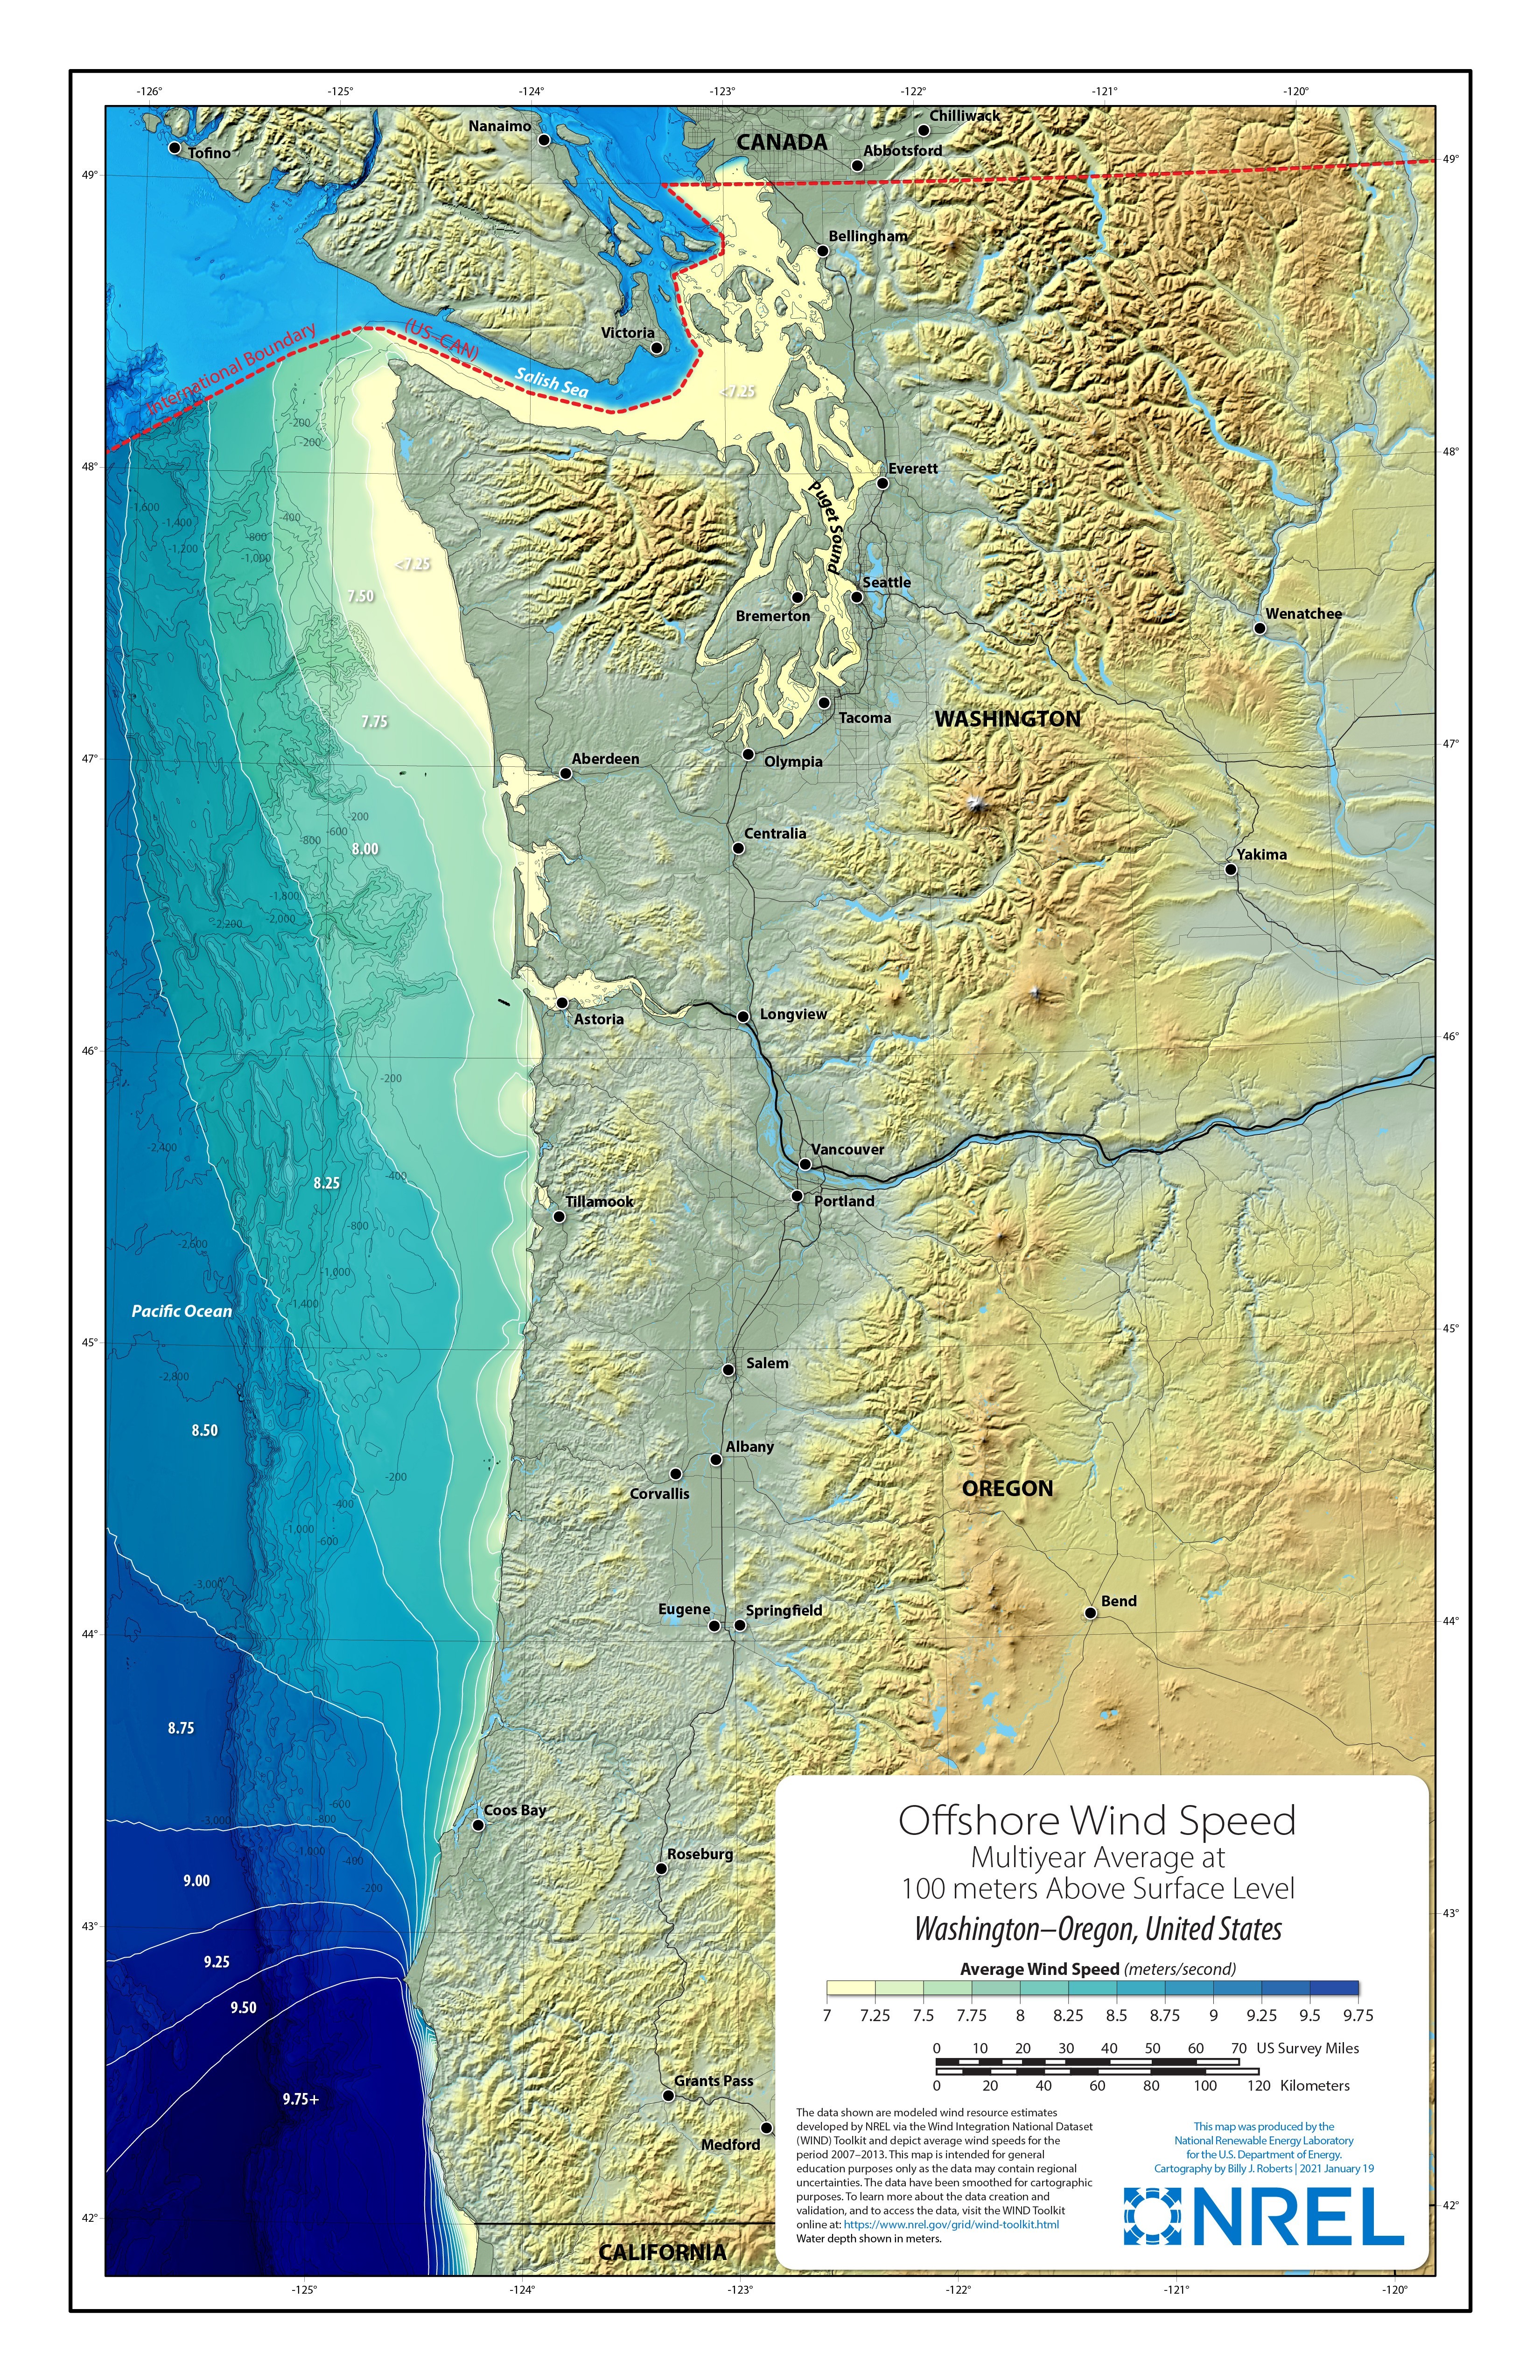 Washington-Oregon Offshore Wind Speed at 100 Meters